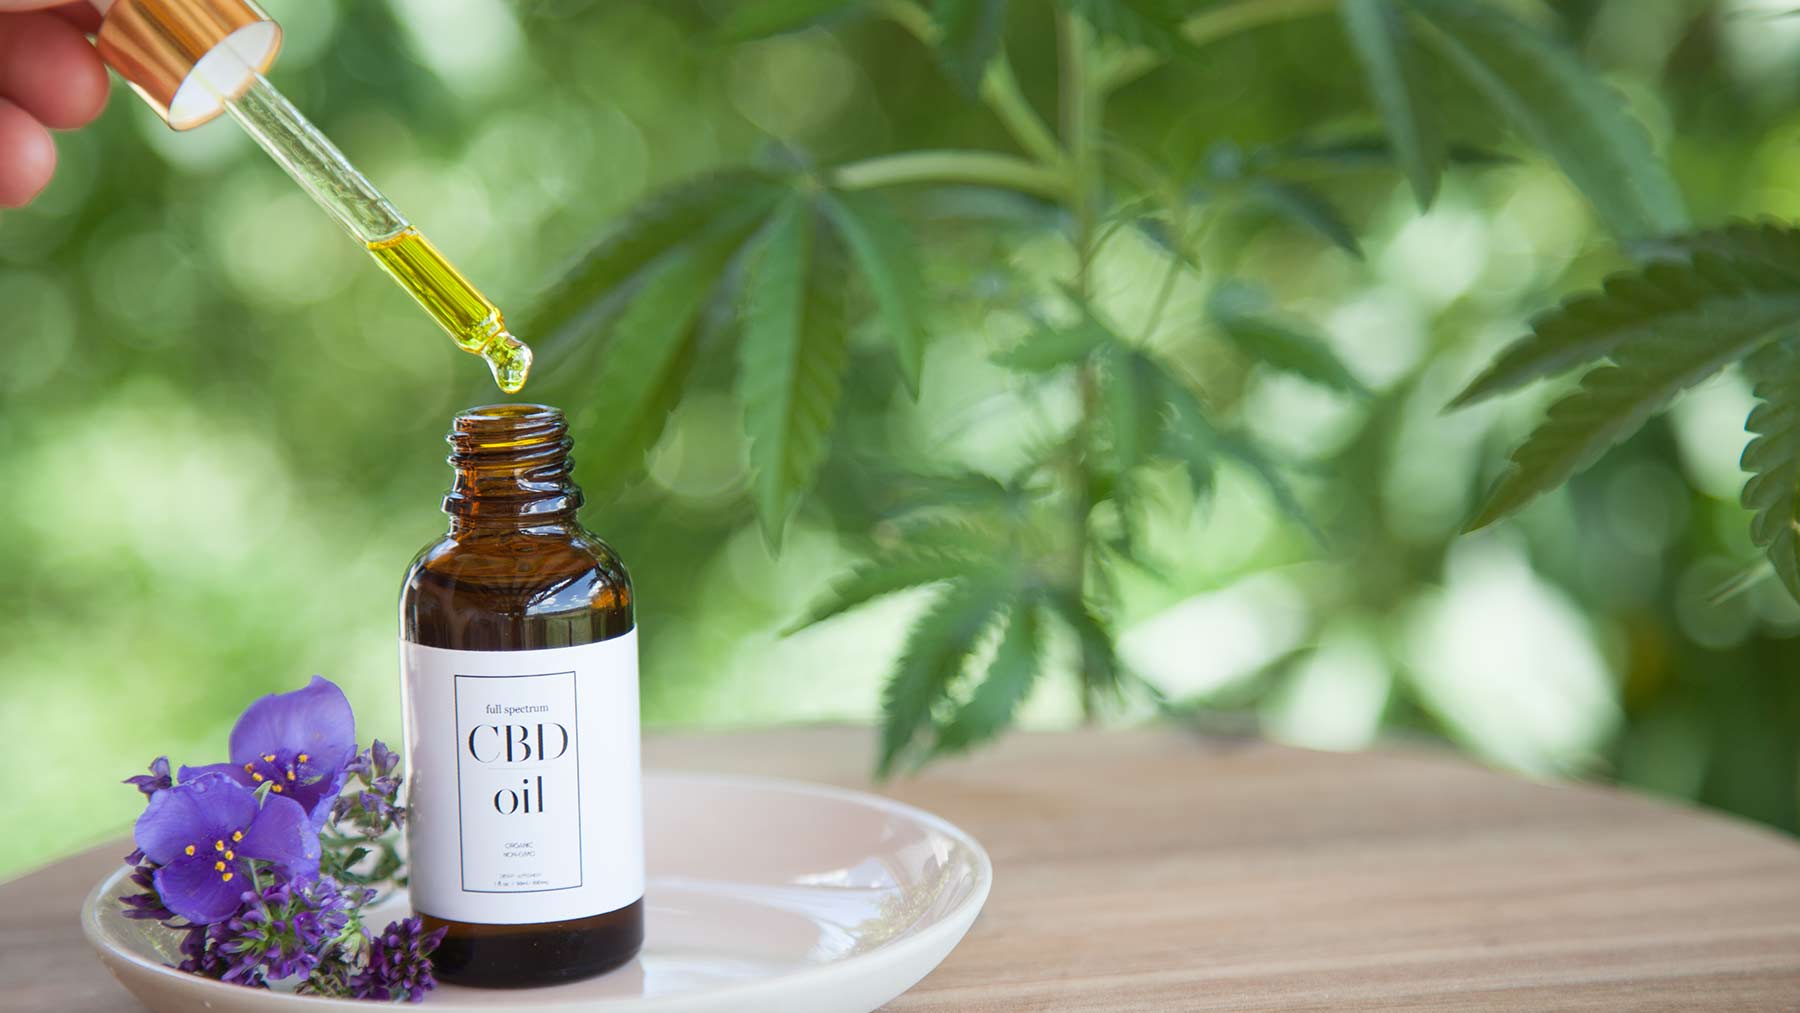 Get familiar with the productive uses of cbd